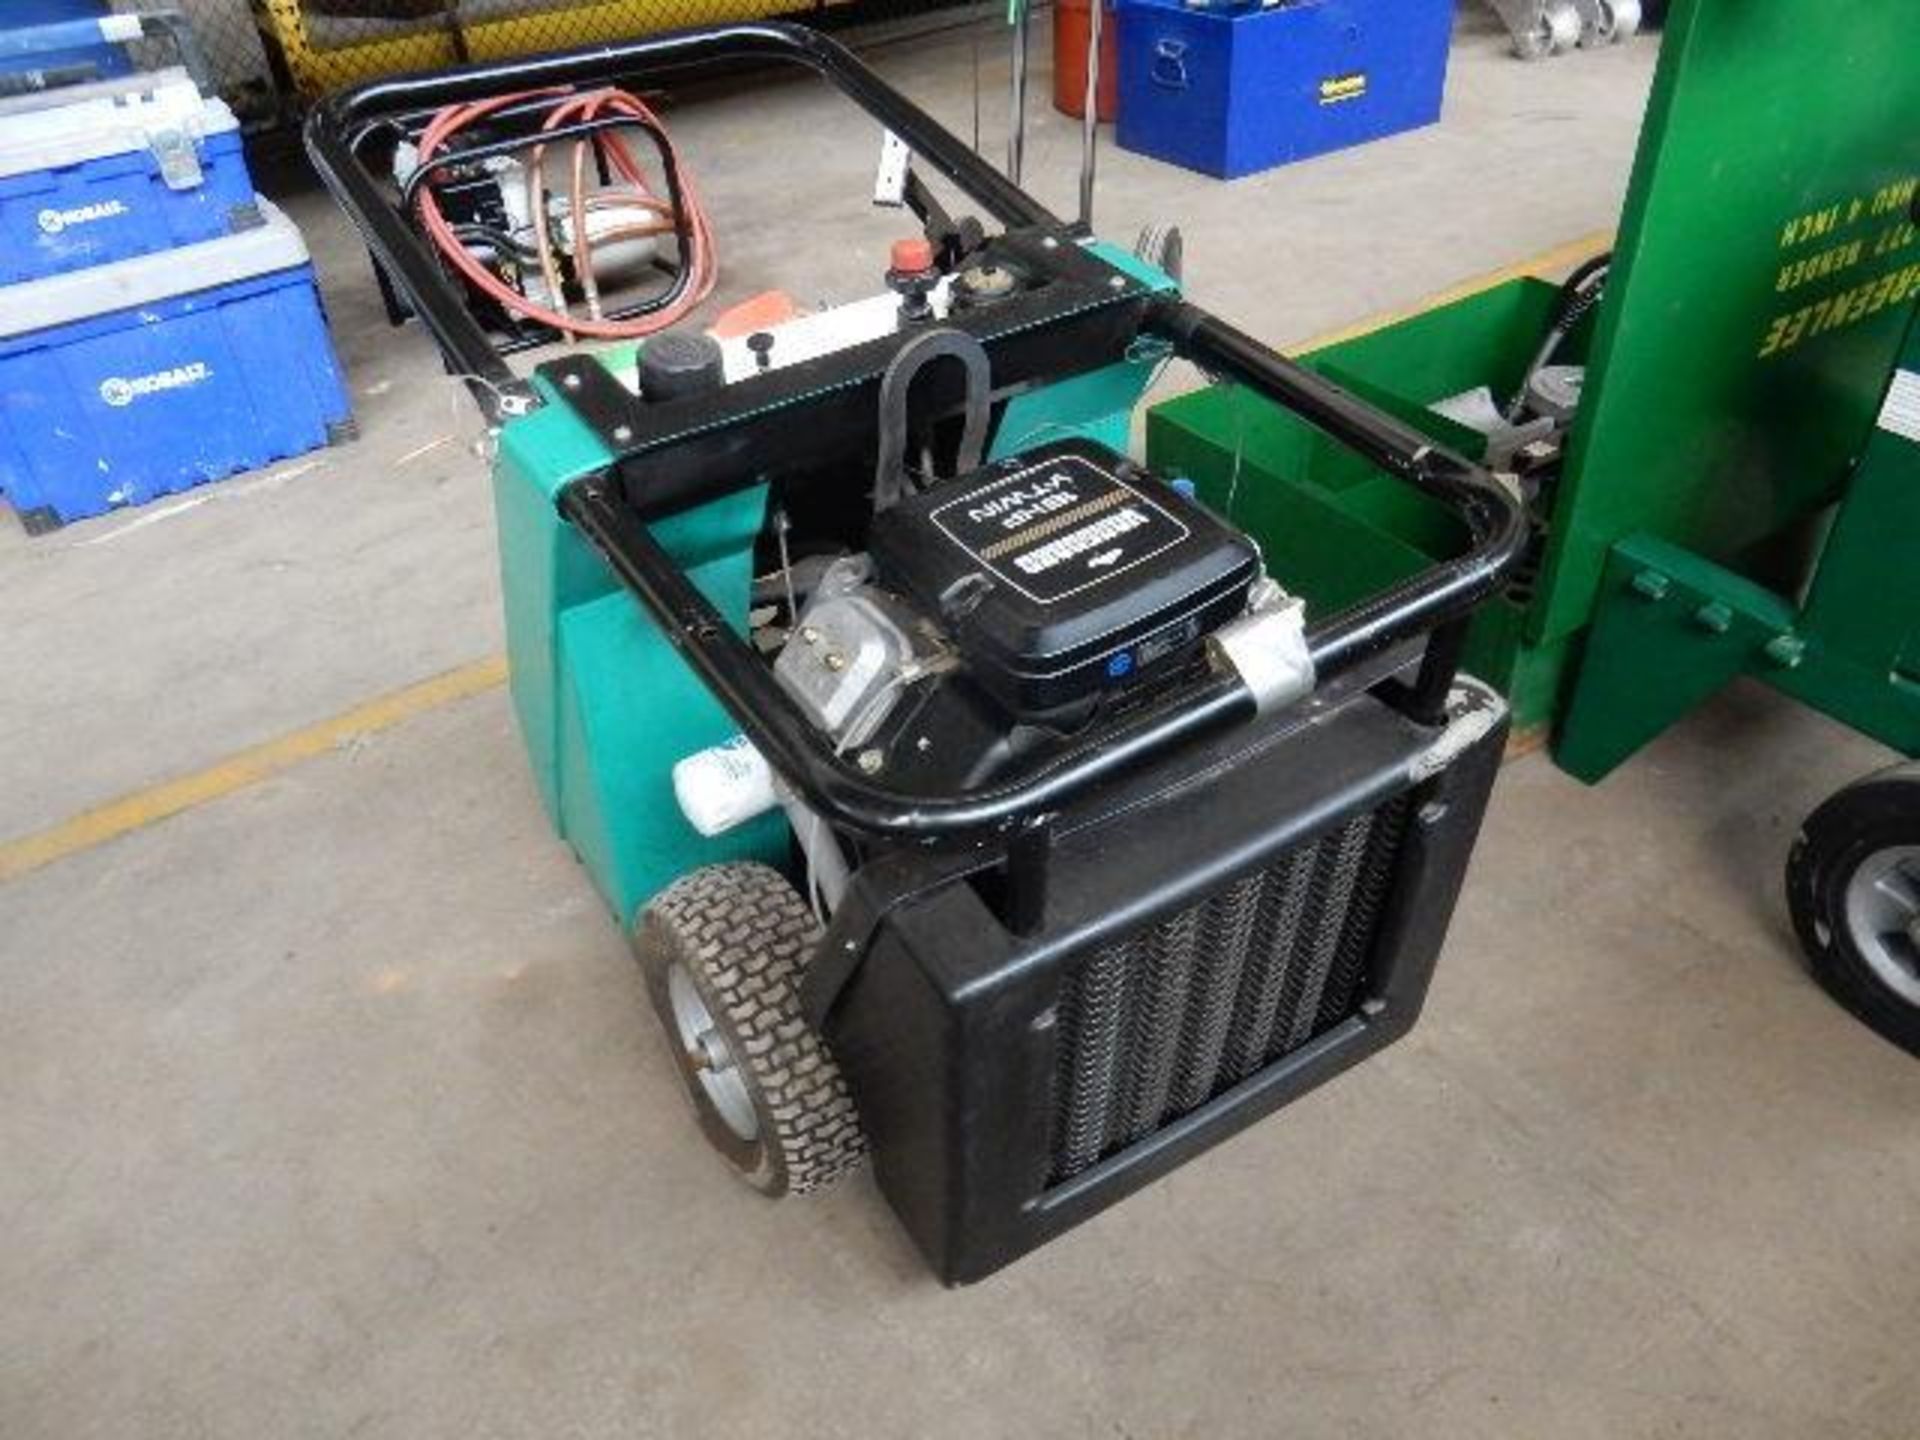 GREENLEE Fairmont Portable Hydraulic Power Pump w/ Vanguard 18 HP V-Twin - Image 5 of 9